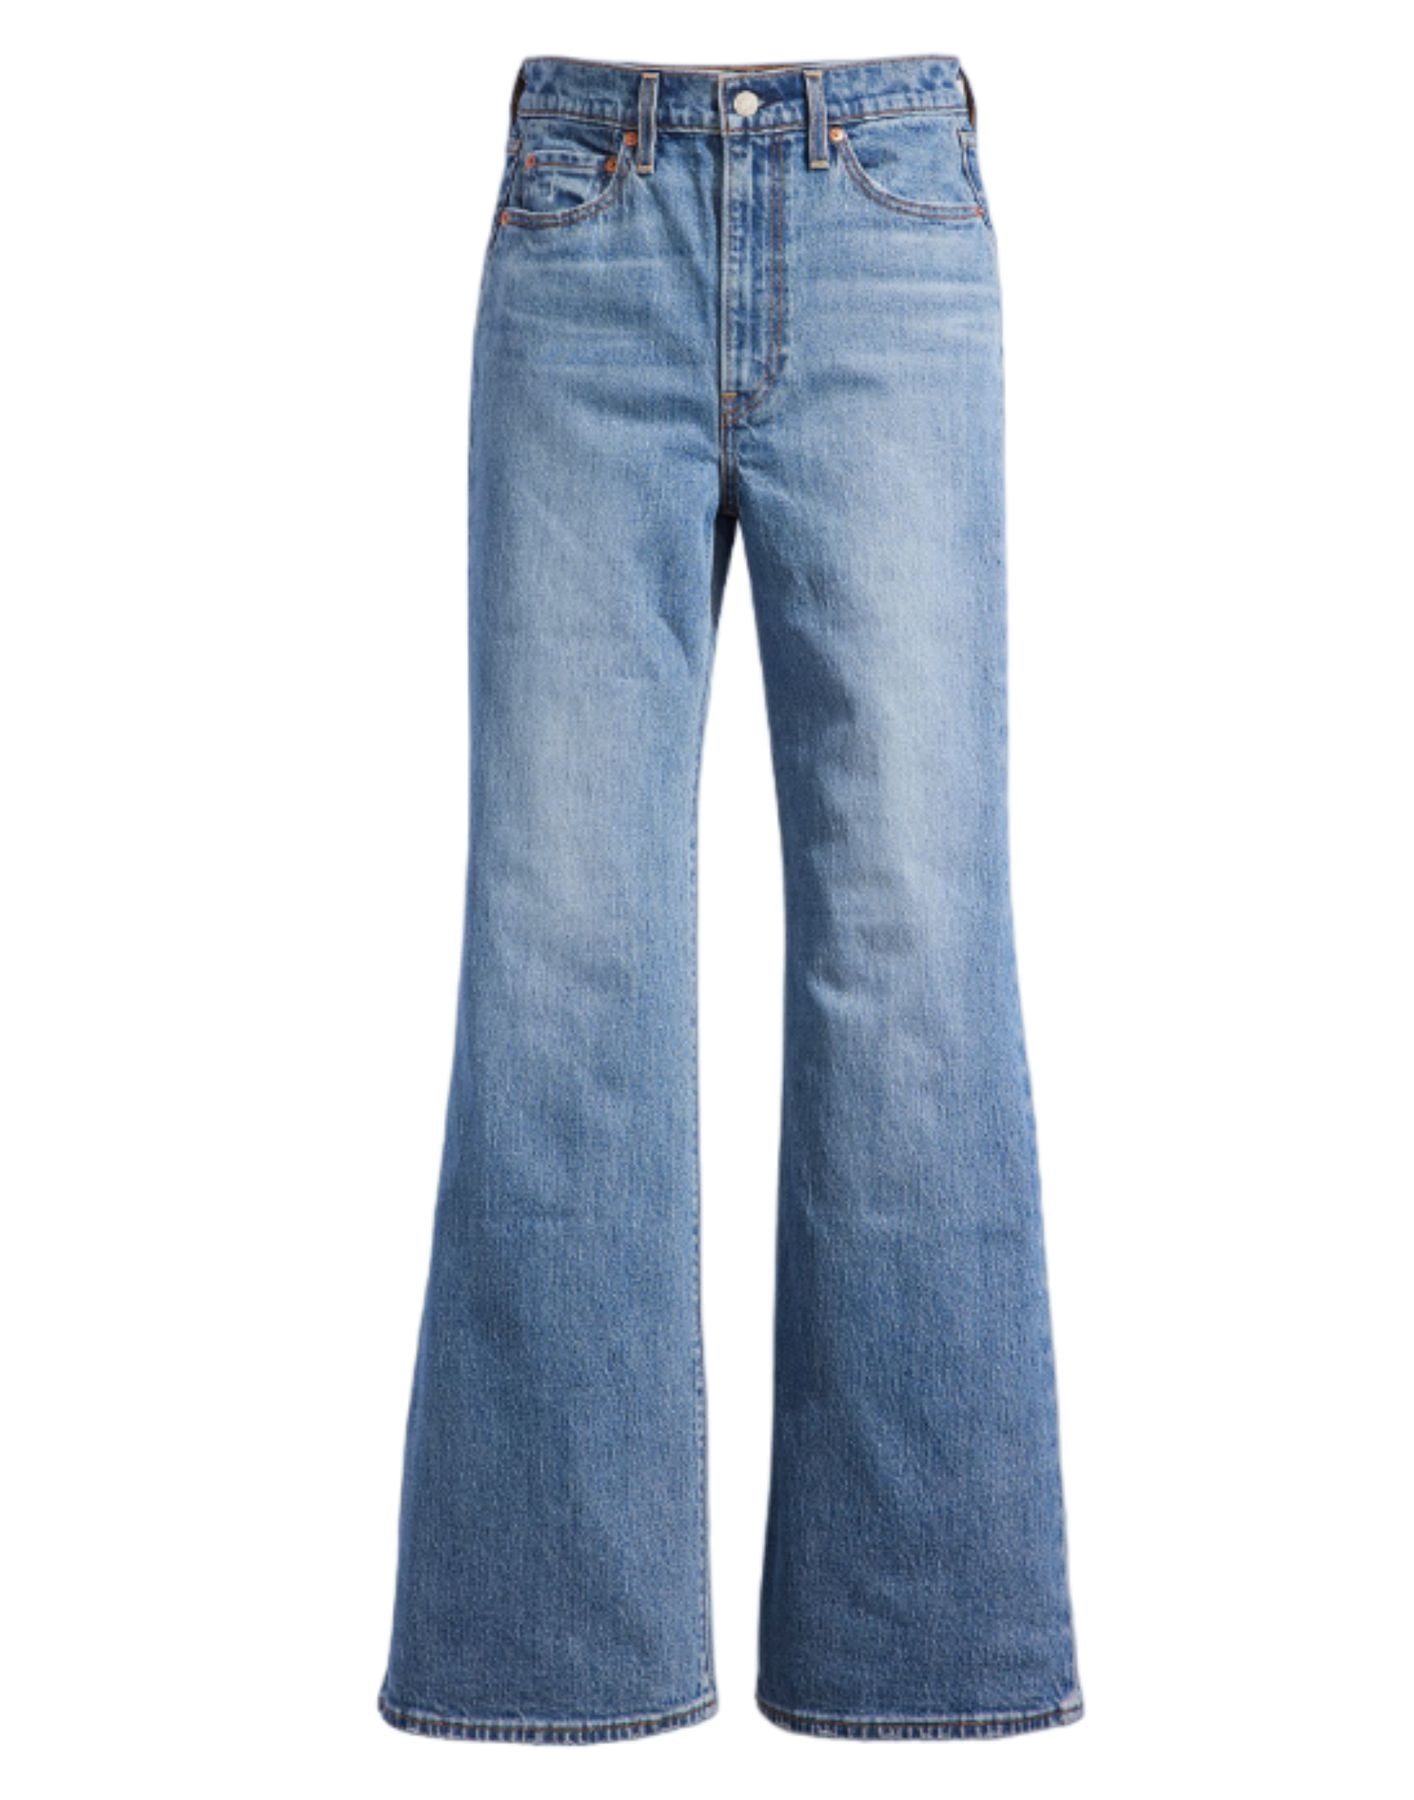 Jeans for woman A75030009 Levi's